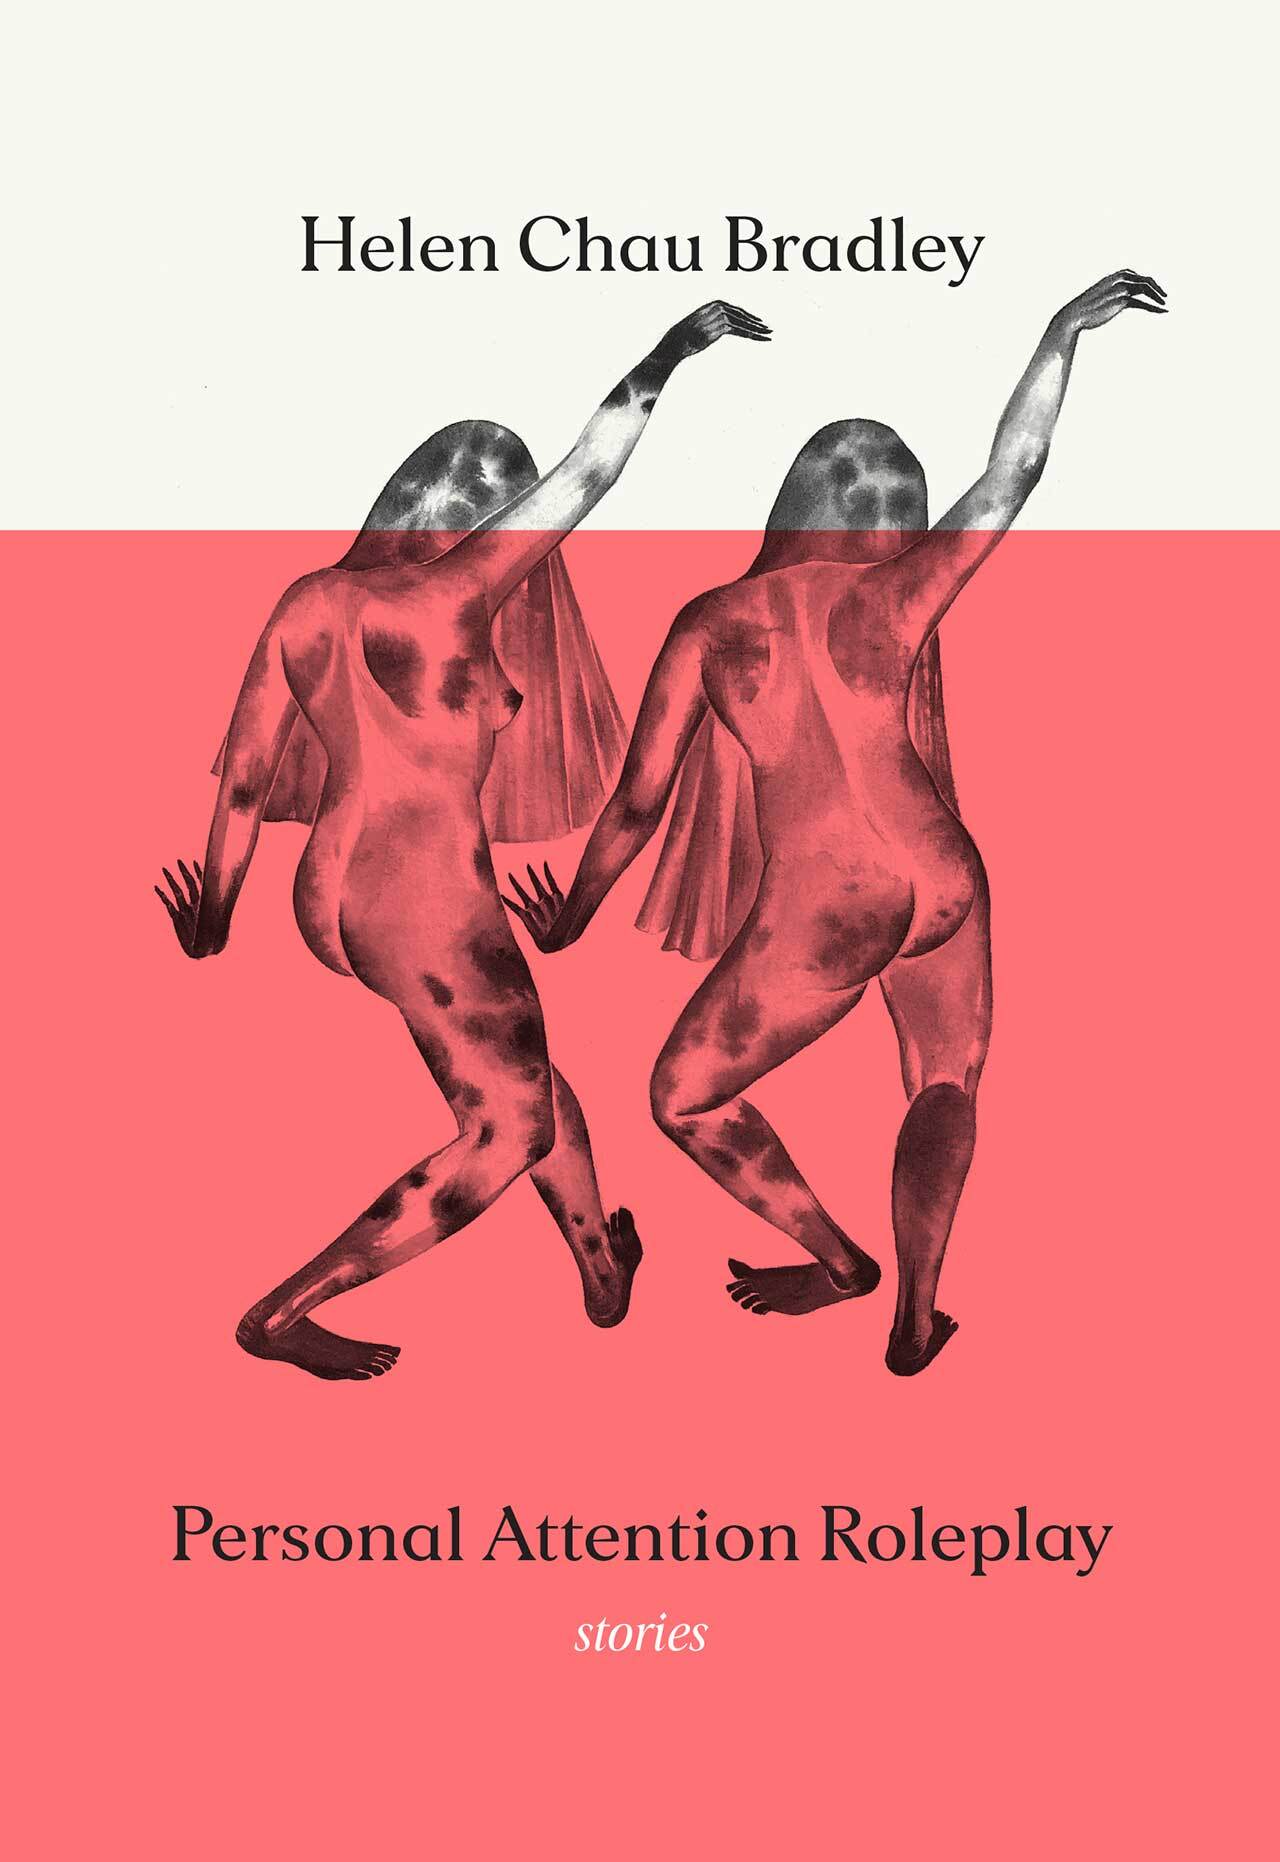 The cover of Personal Attention Roleplay